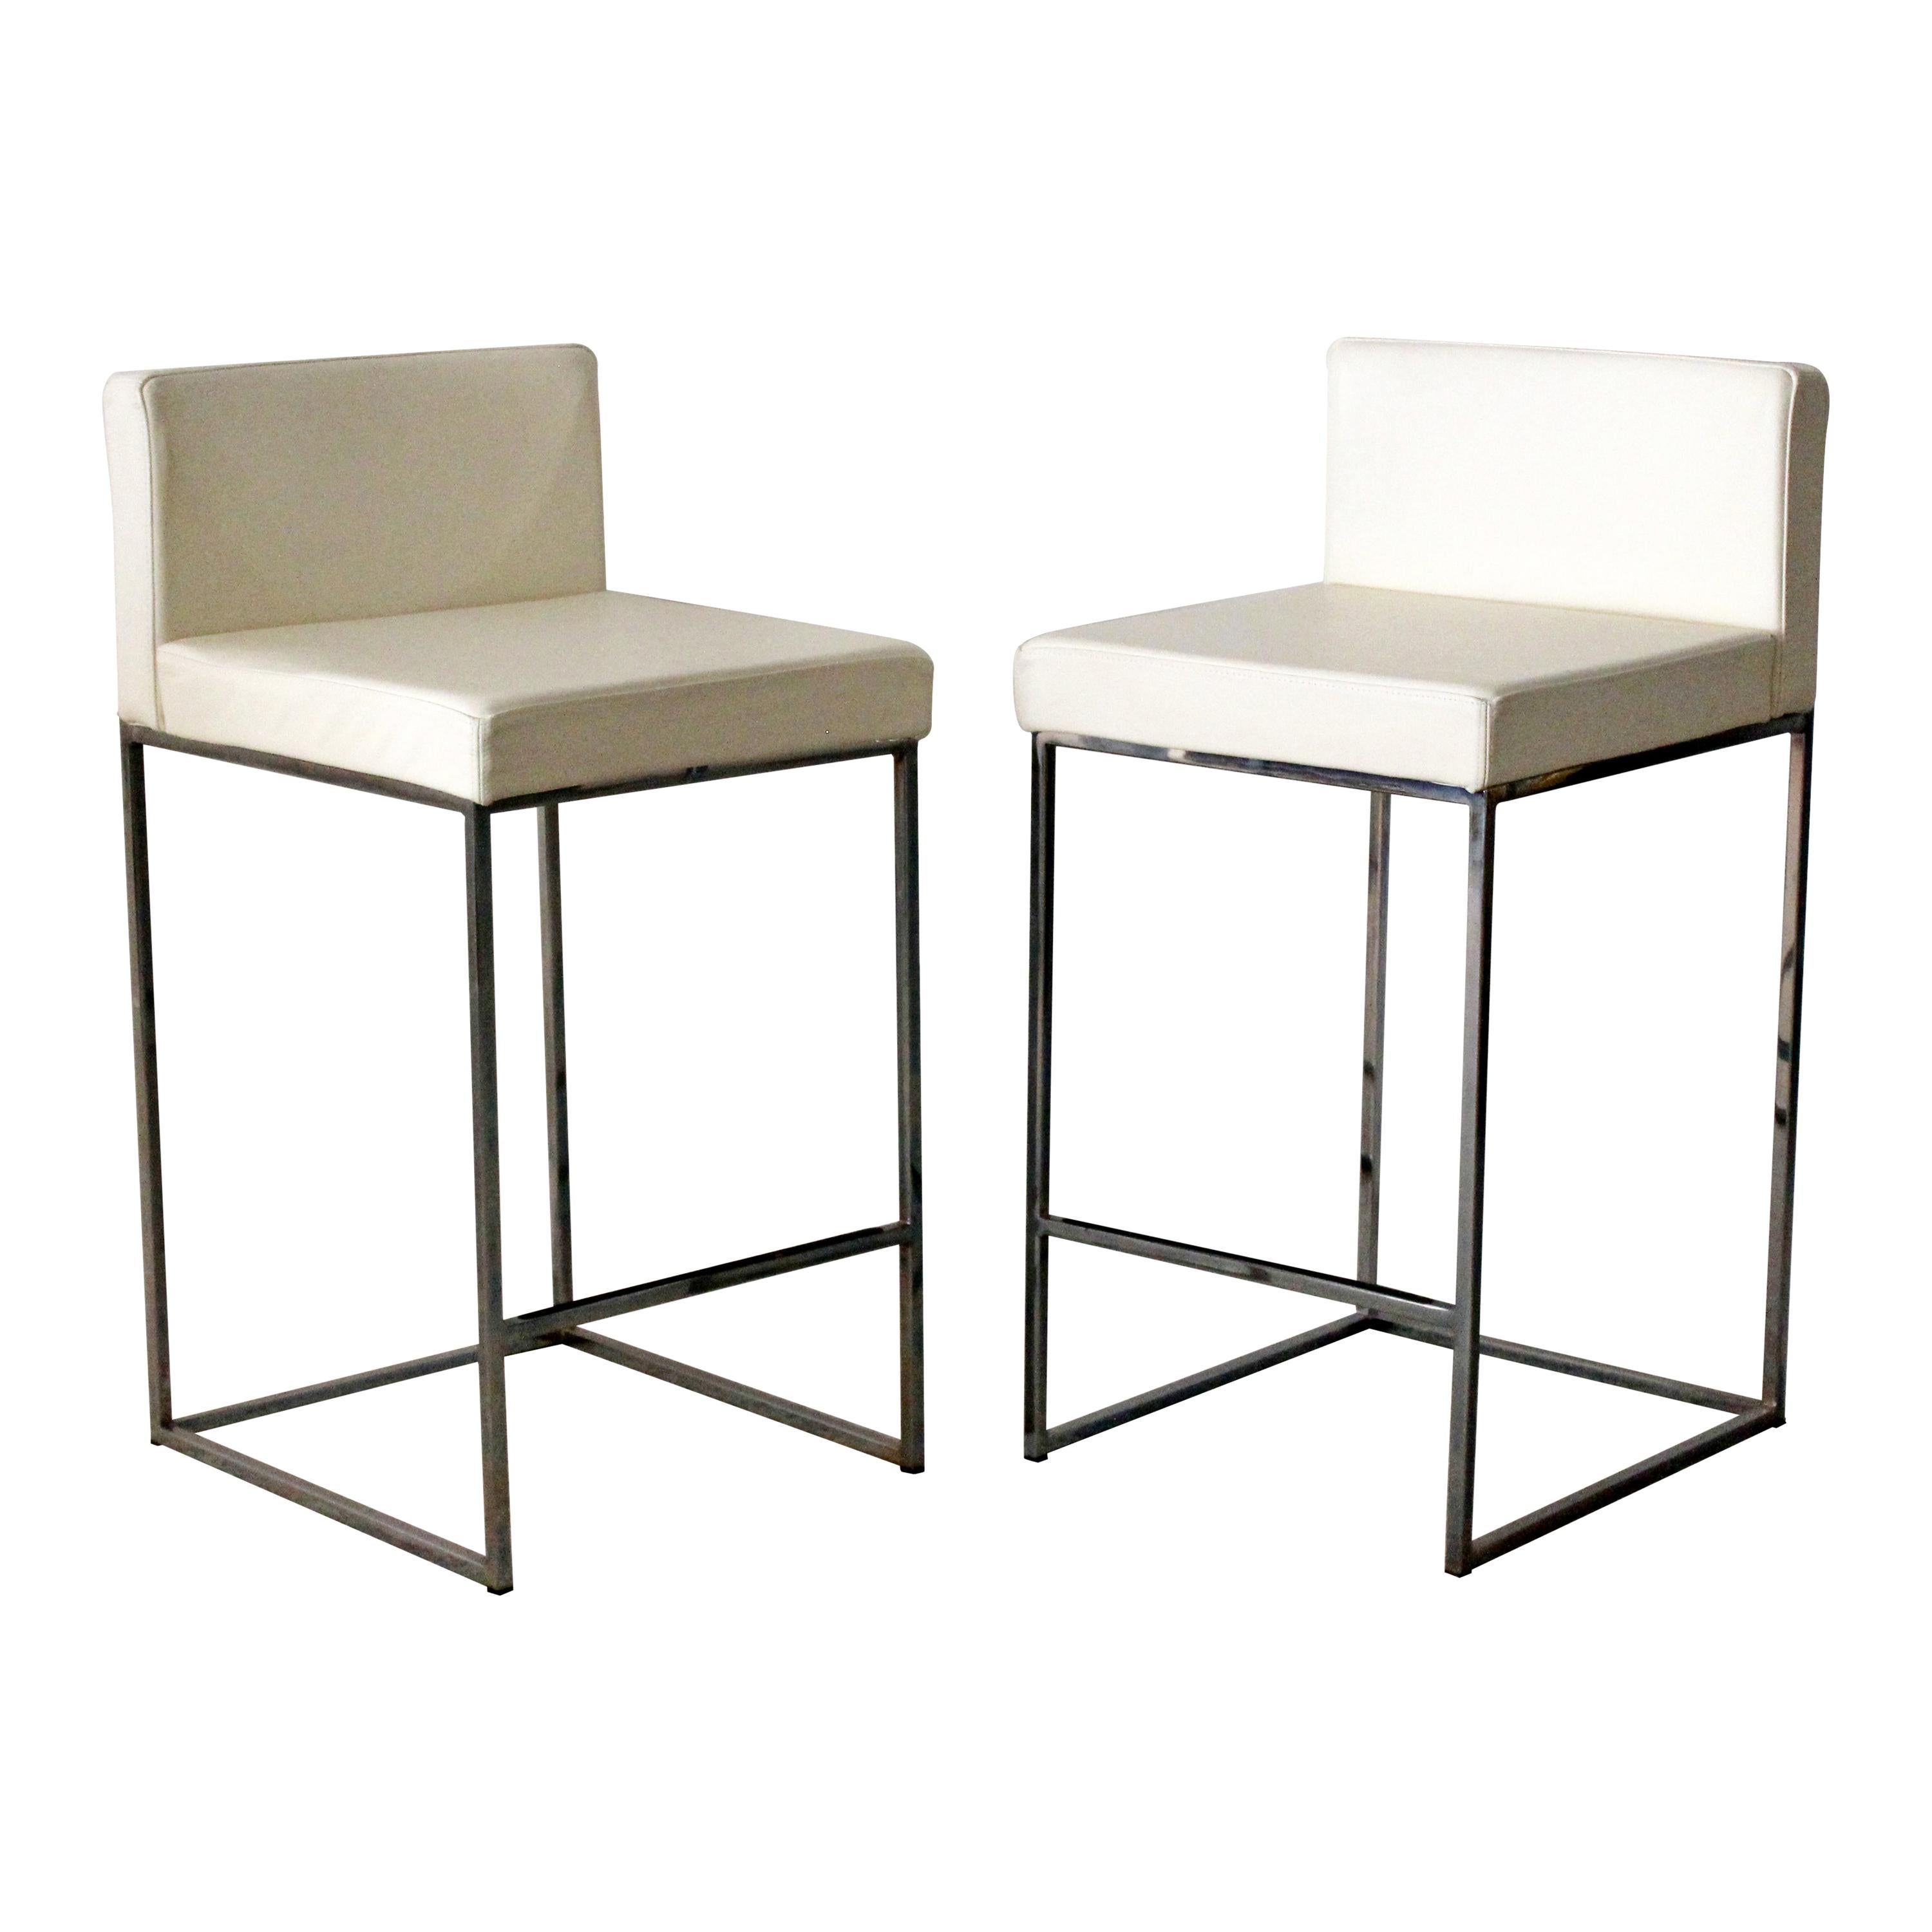 Contemporary Modernist Calligaris Pair of Brushed Aluminum Counter Stools